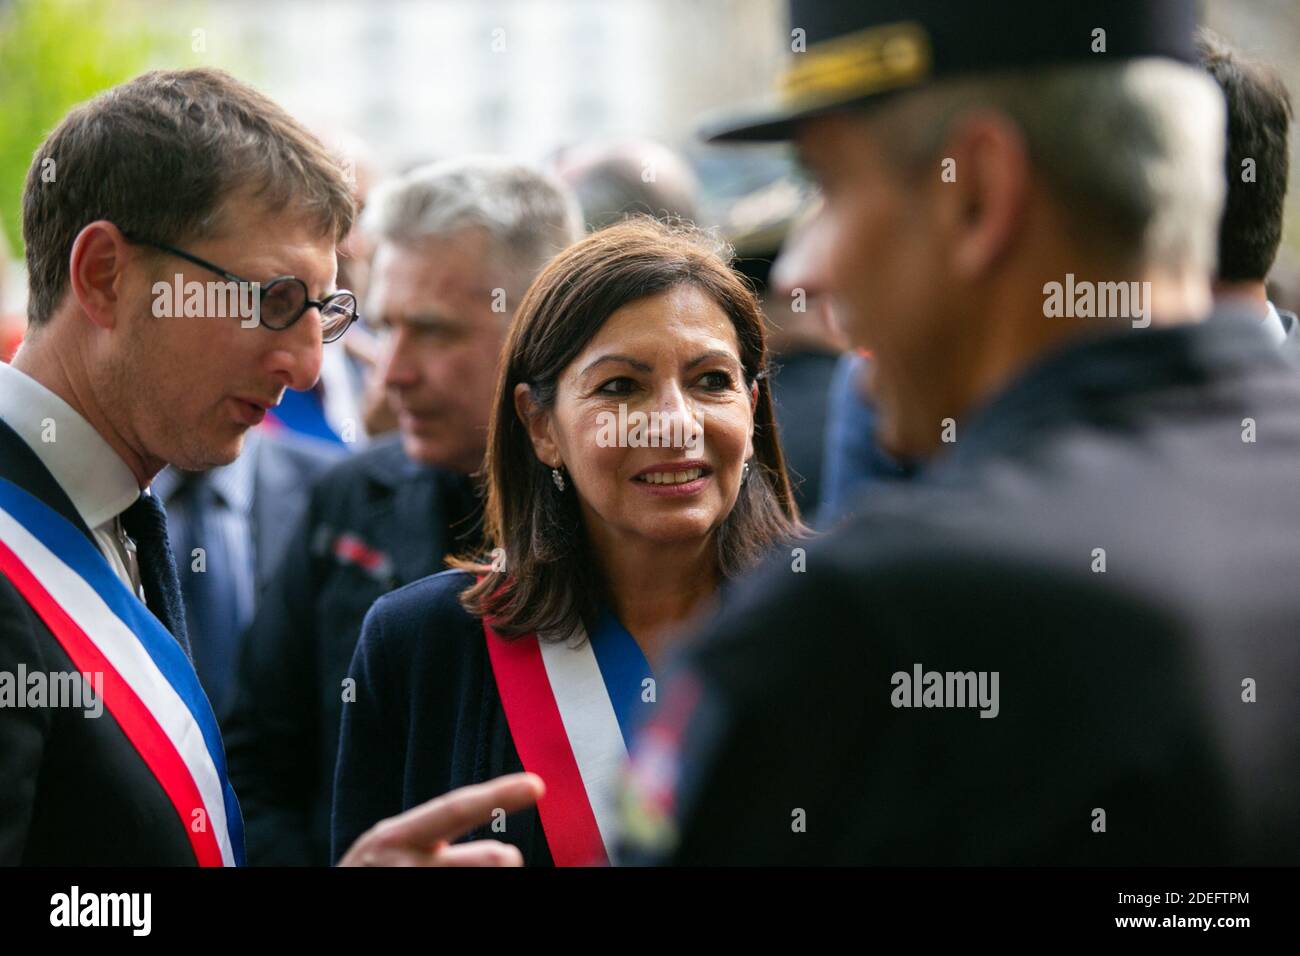 Paris mayor Anne Hidalgo and outside Notre Dame cathedral after a ceremony at the city town hall on April 18, 2019 in Paris. France paid a daylong tribute on April 18, 2019 to the Paris firefighters who saved Notre Dame Cathedral from collapse, while construction workers rushed to secure an area above one of the church's famed rose-shaped windows and other vulnerable sections of the fire-damaged landmark. Photo by Pierre Gautheron/ABACAPRESS.COM Stock Photo